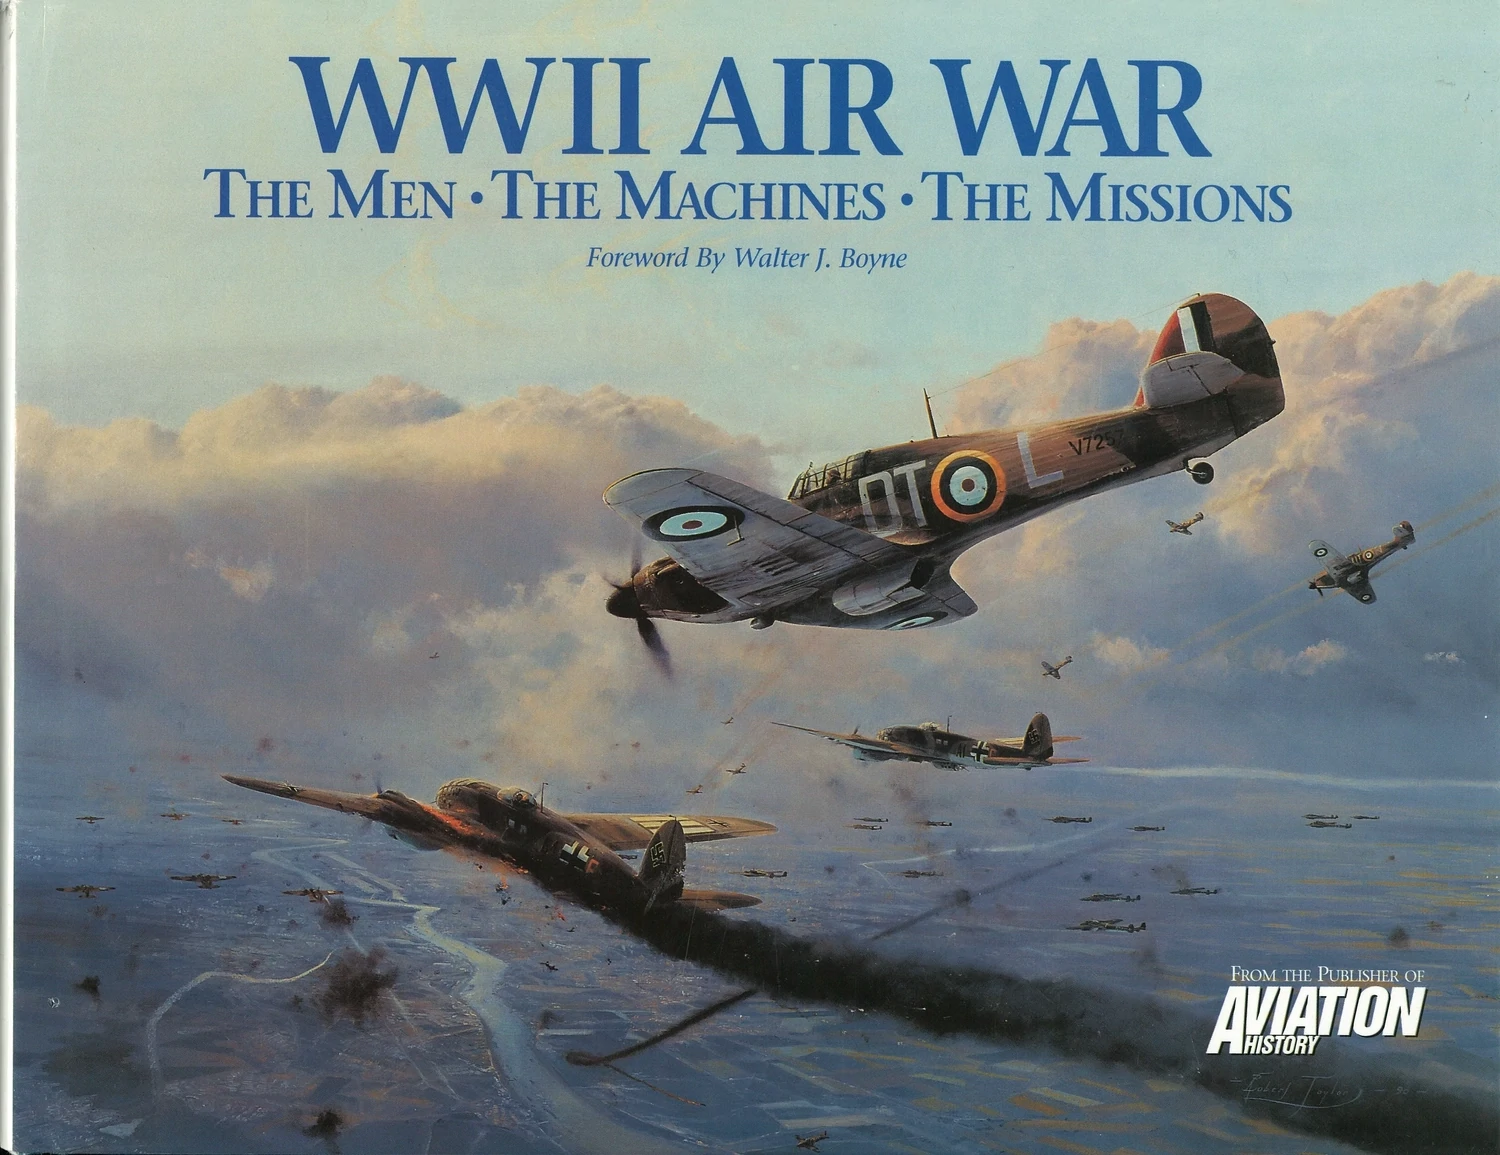 WWII Air War: The Men, The Machines, The Missions ed. Roger L. Vance